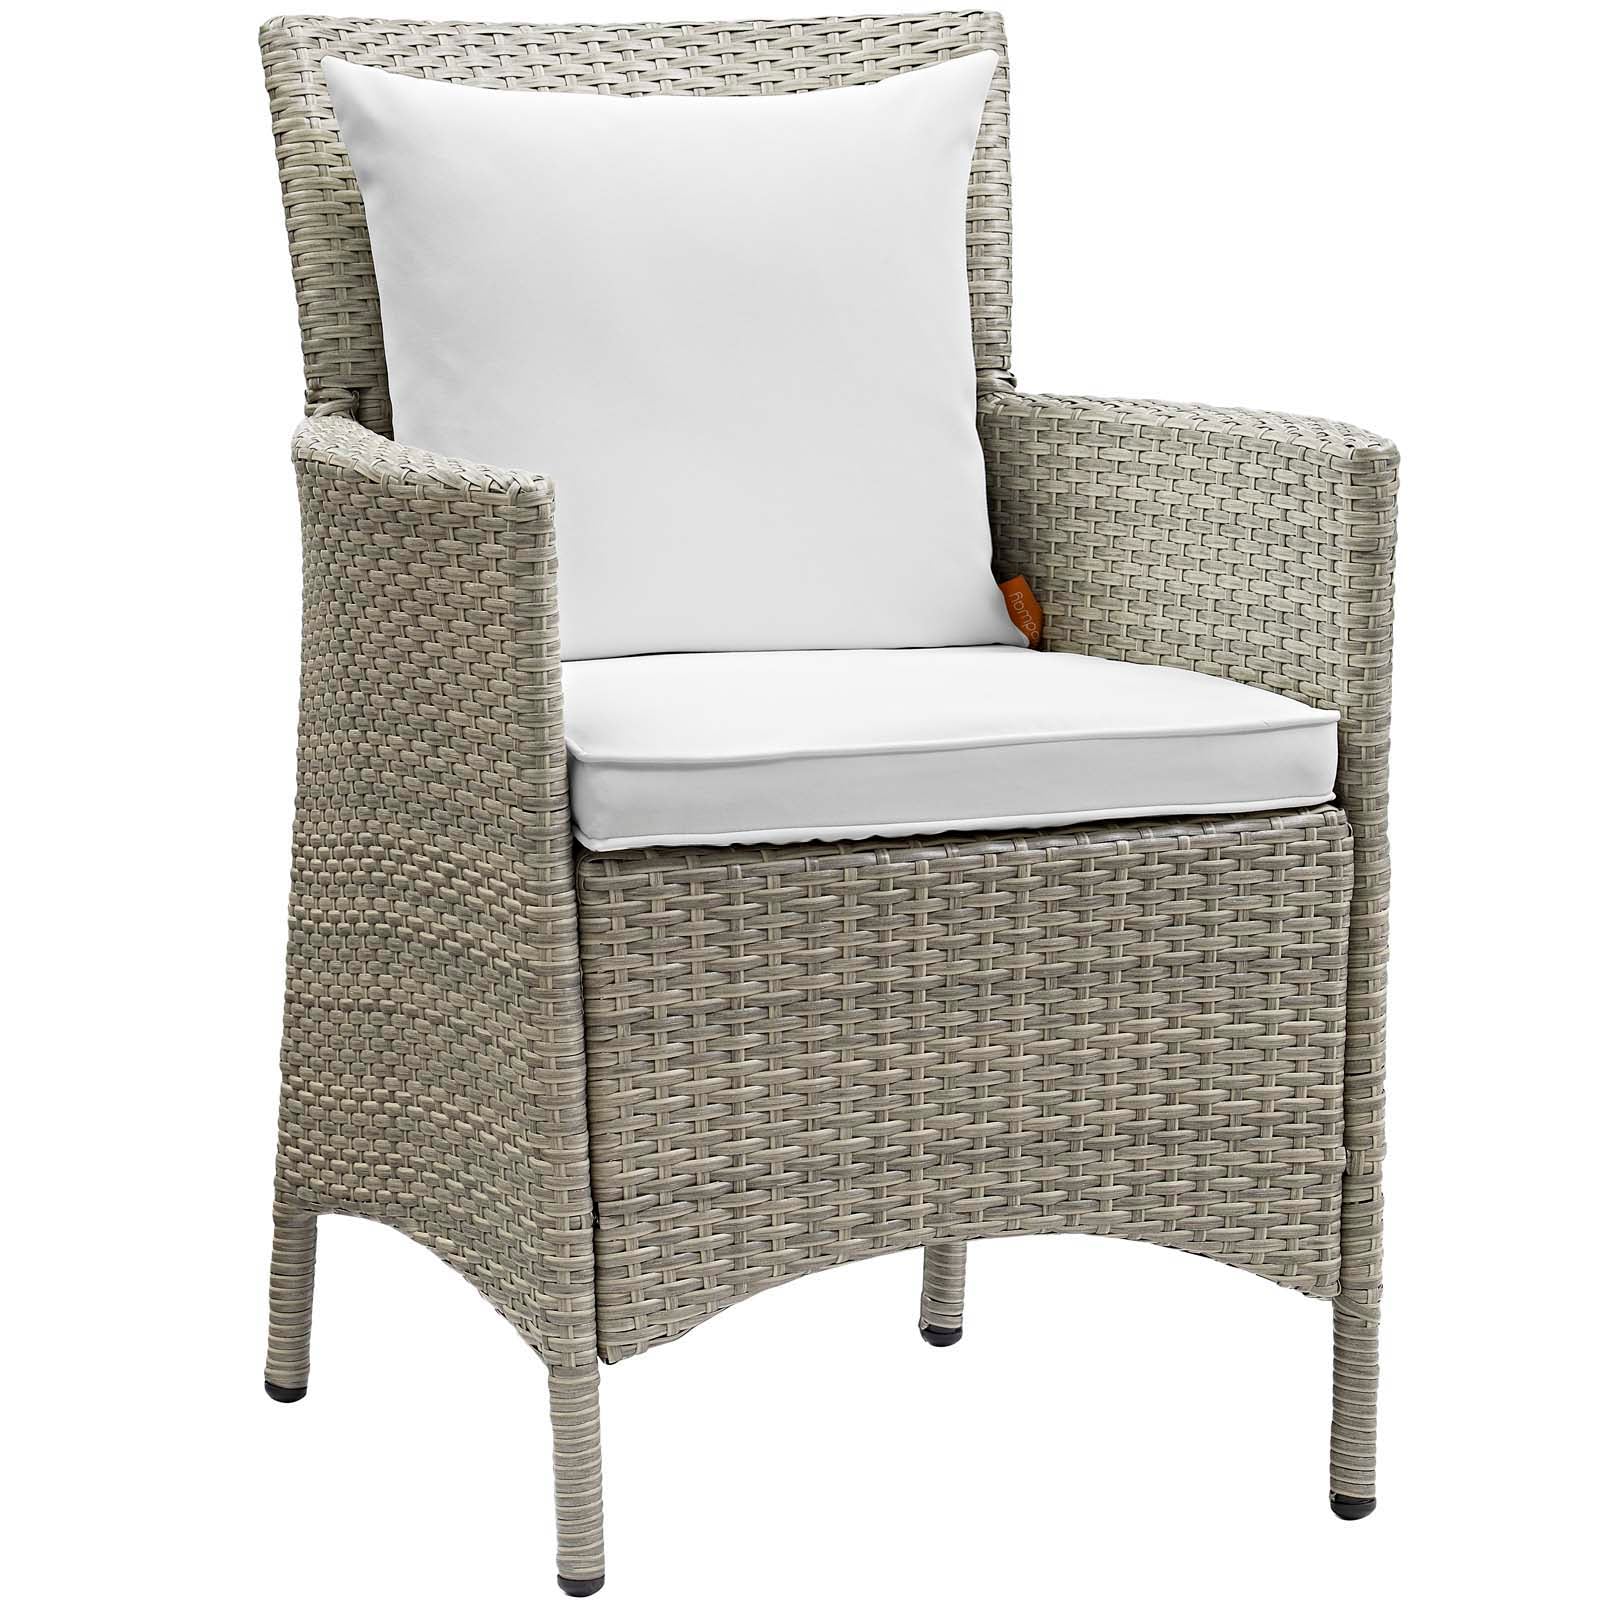 Modway Outdoor Dining Chairs - Conduit Outdoor Patio Wicker Rattan Dining Armchair Set of 4 Light Gray White